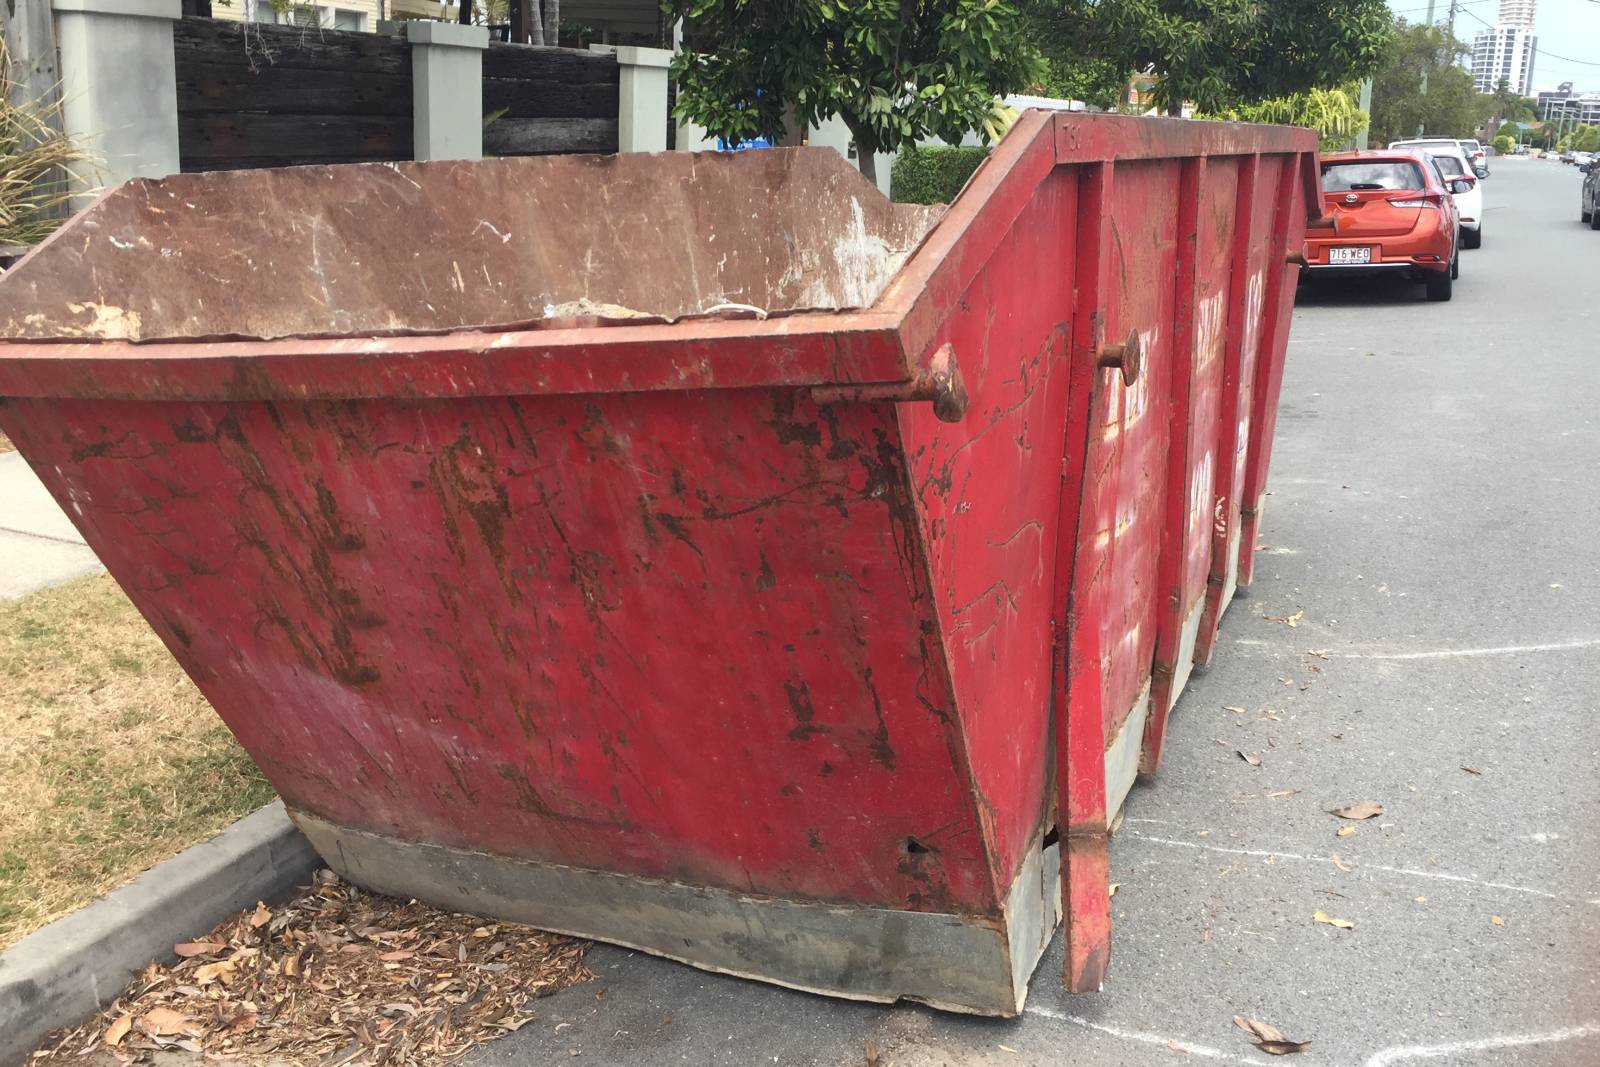 Top 4 Questions About Skip Bins, Answered